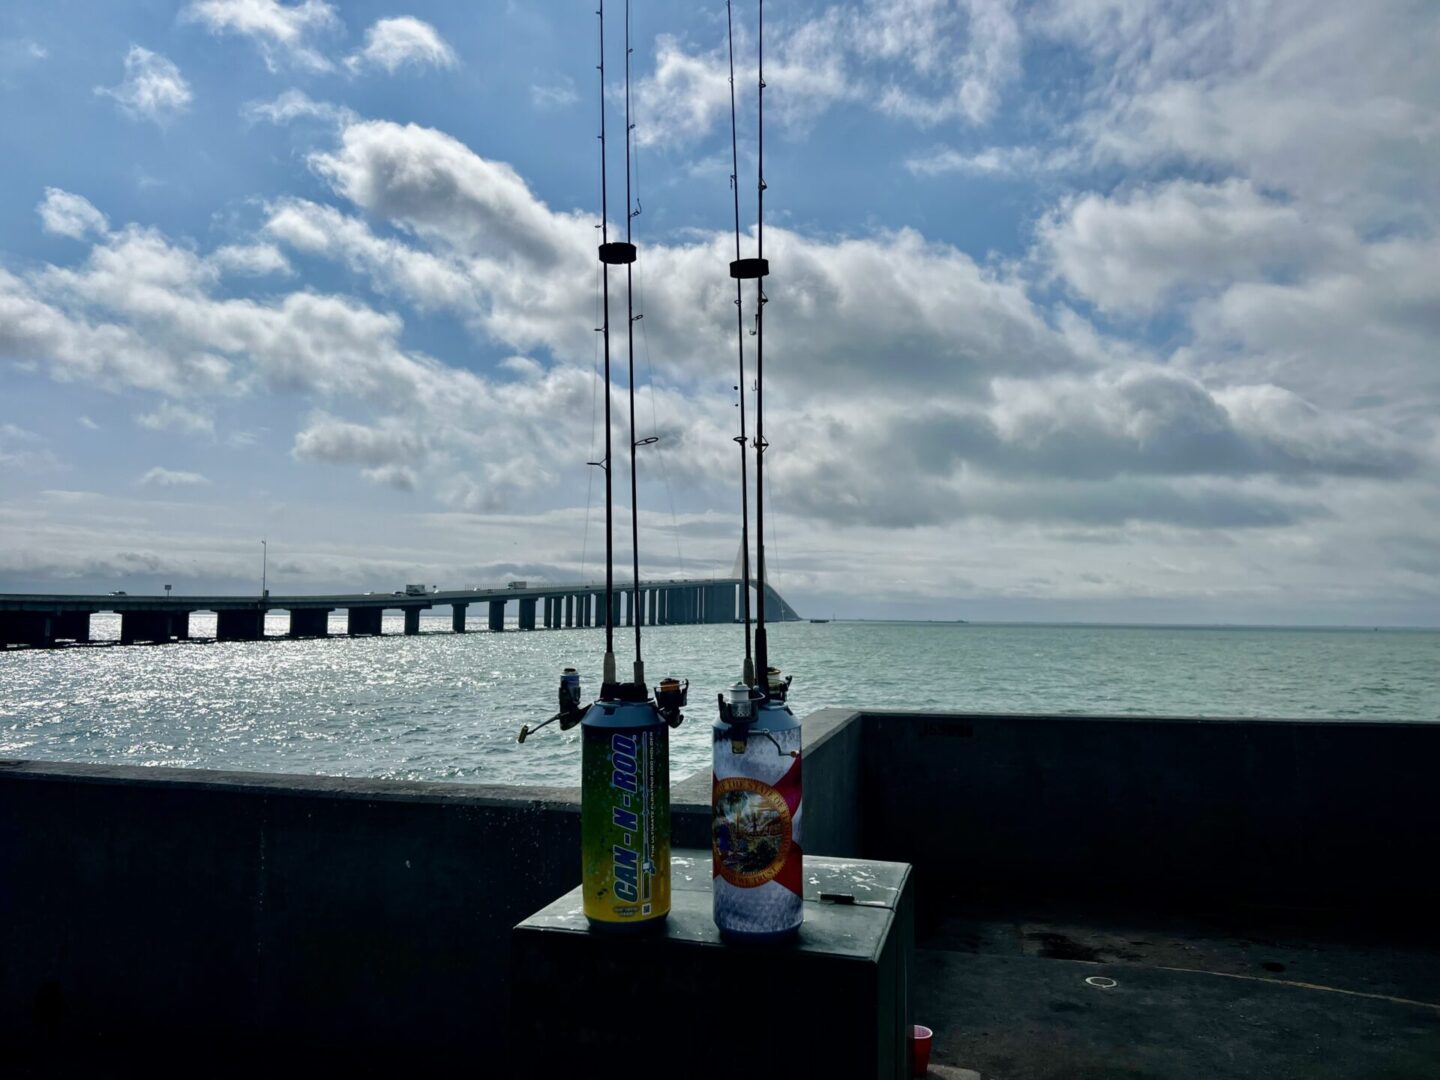 Two fishing rods leaning against a wall with bait containers, overlooking a calm sea and a distant pier under a partly cloudy sky.